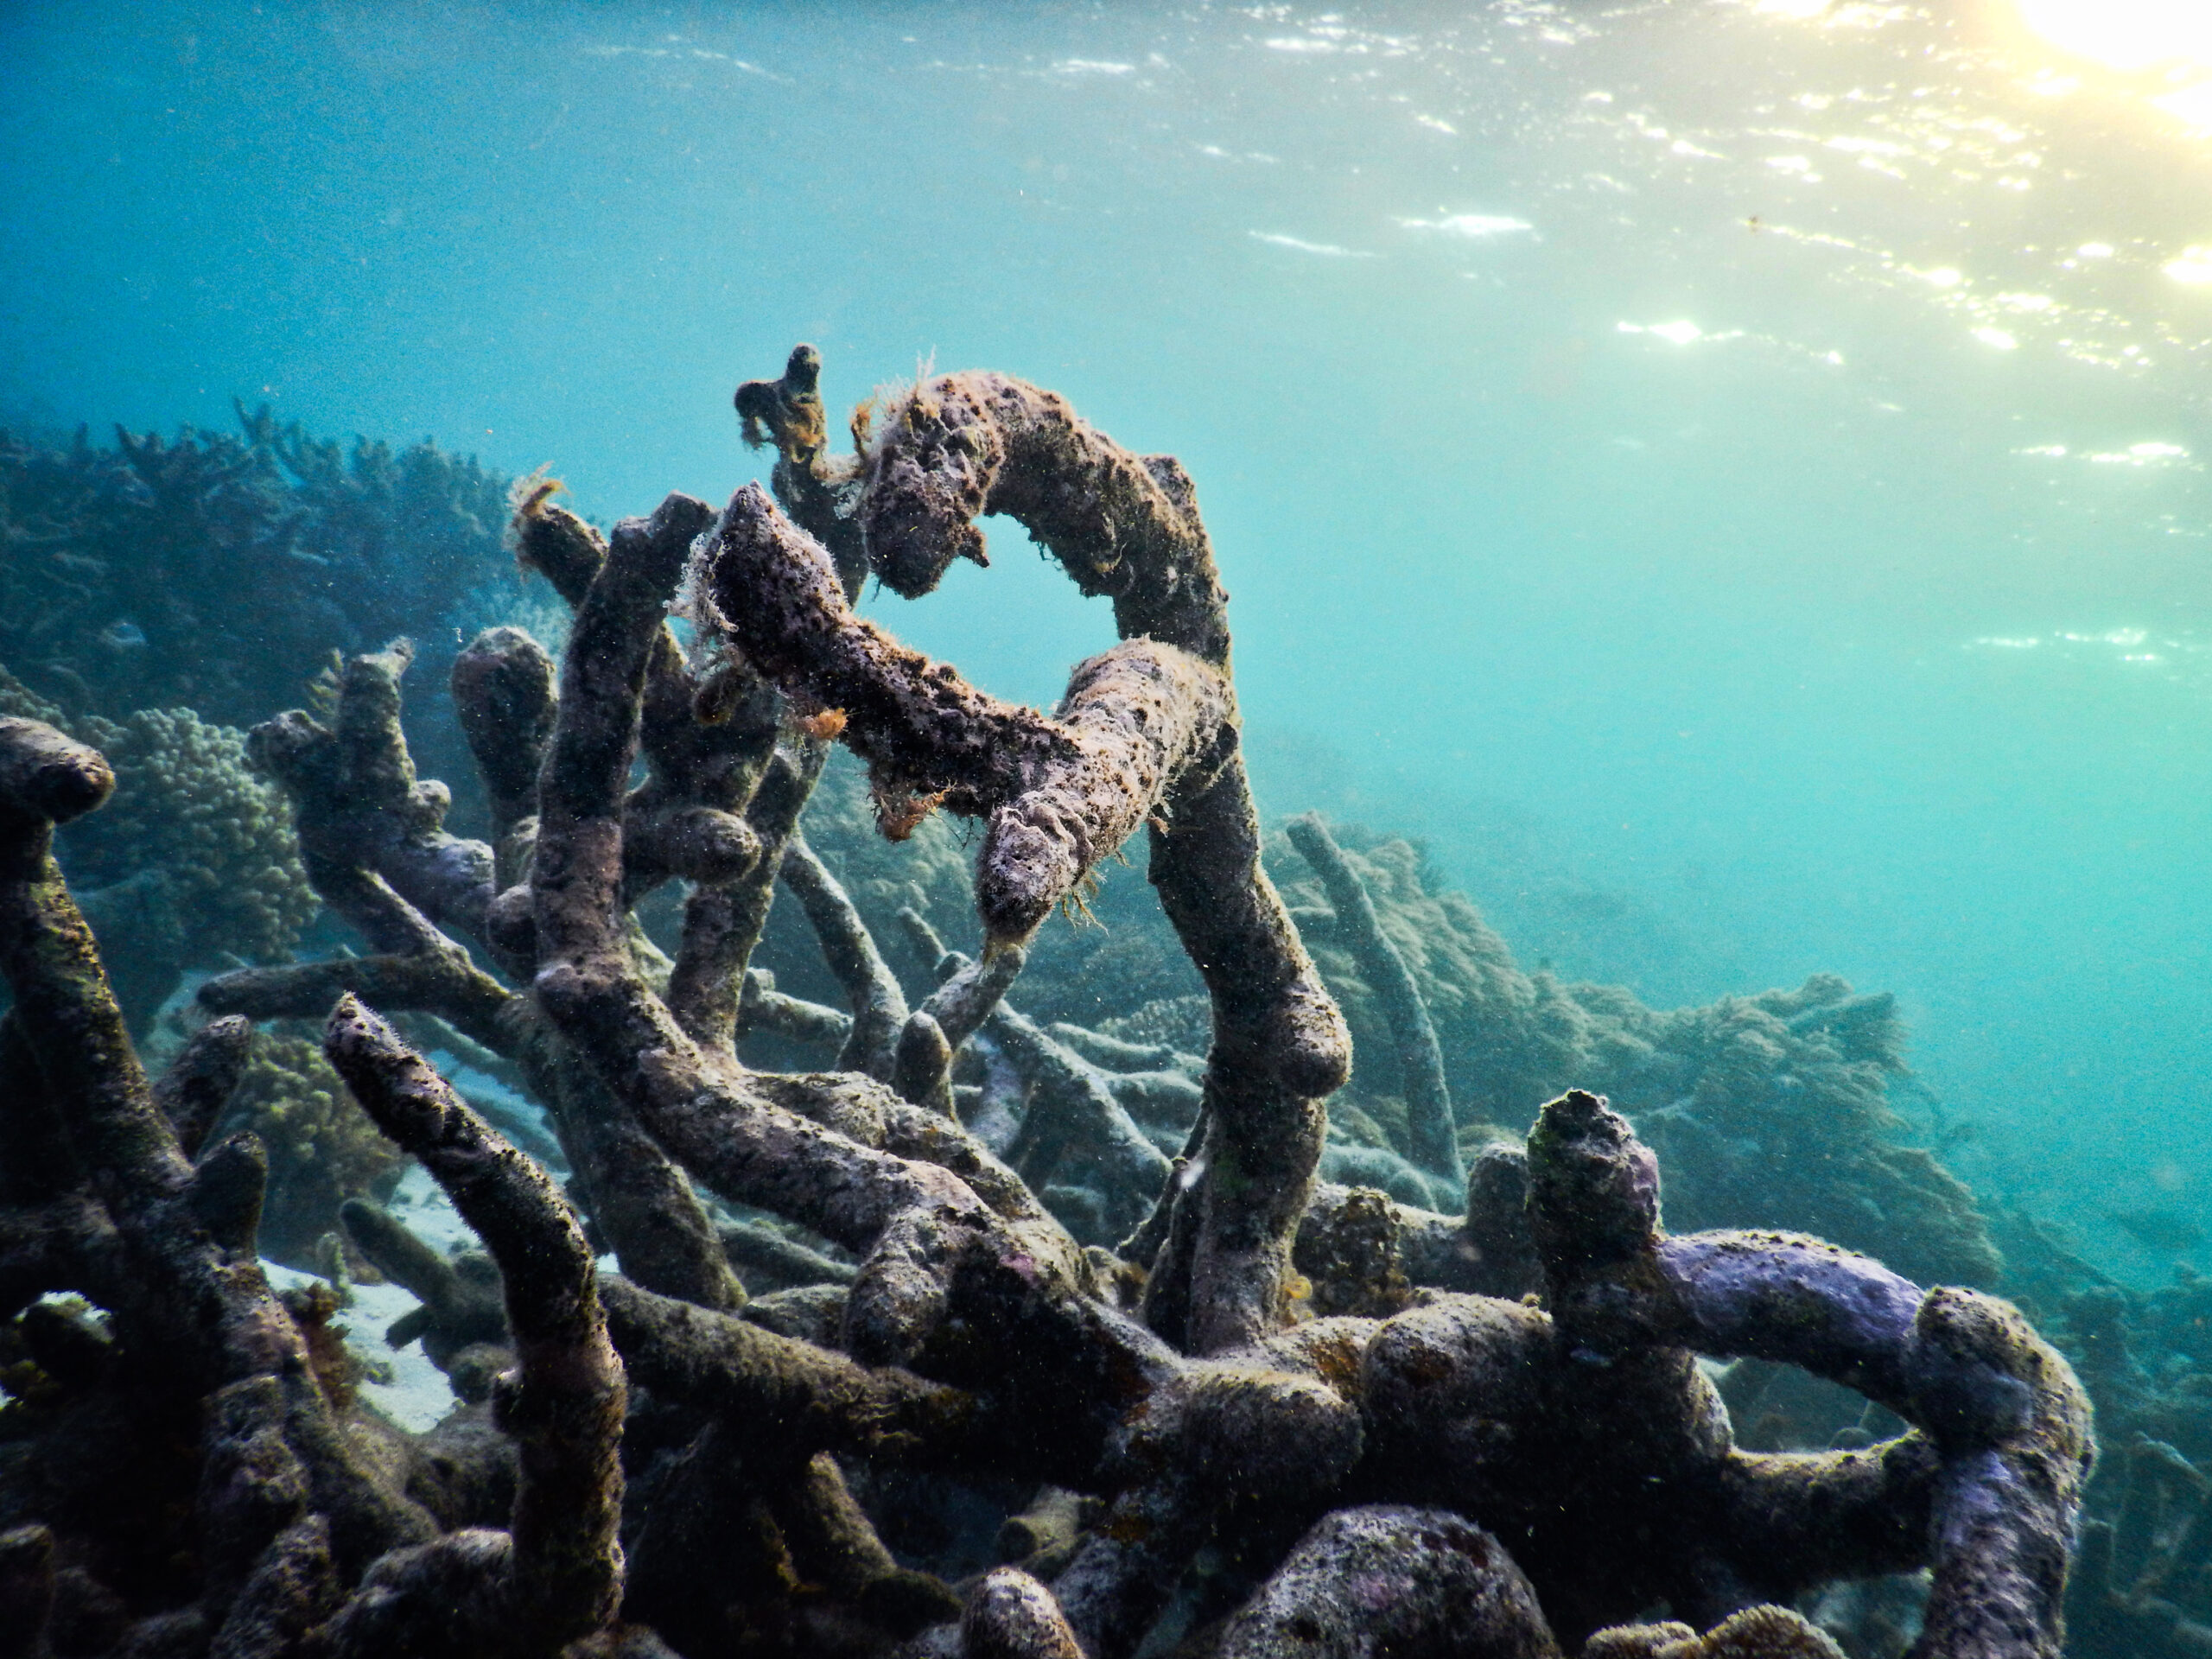 Dead coral rubble on the recently-damaged Great Barrier Reef